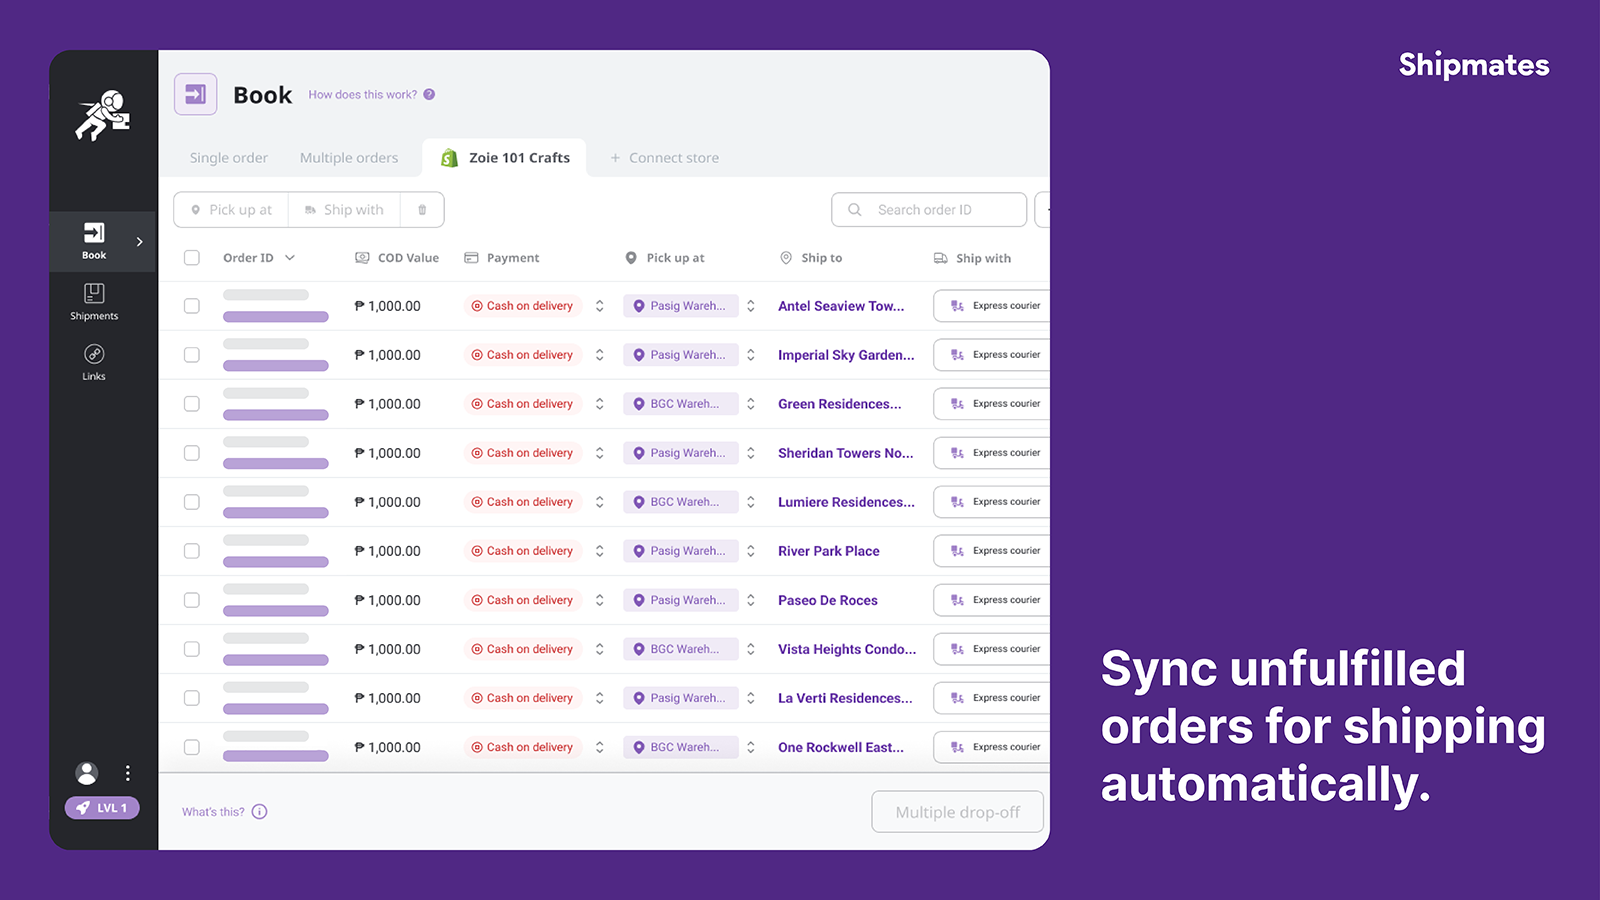 Sync unfulfilled orders for shipping automatically.